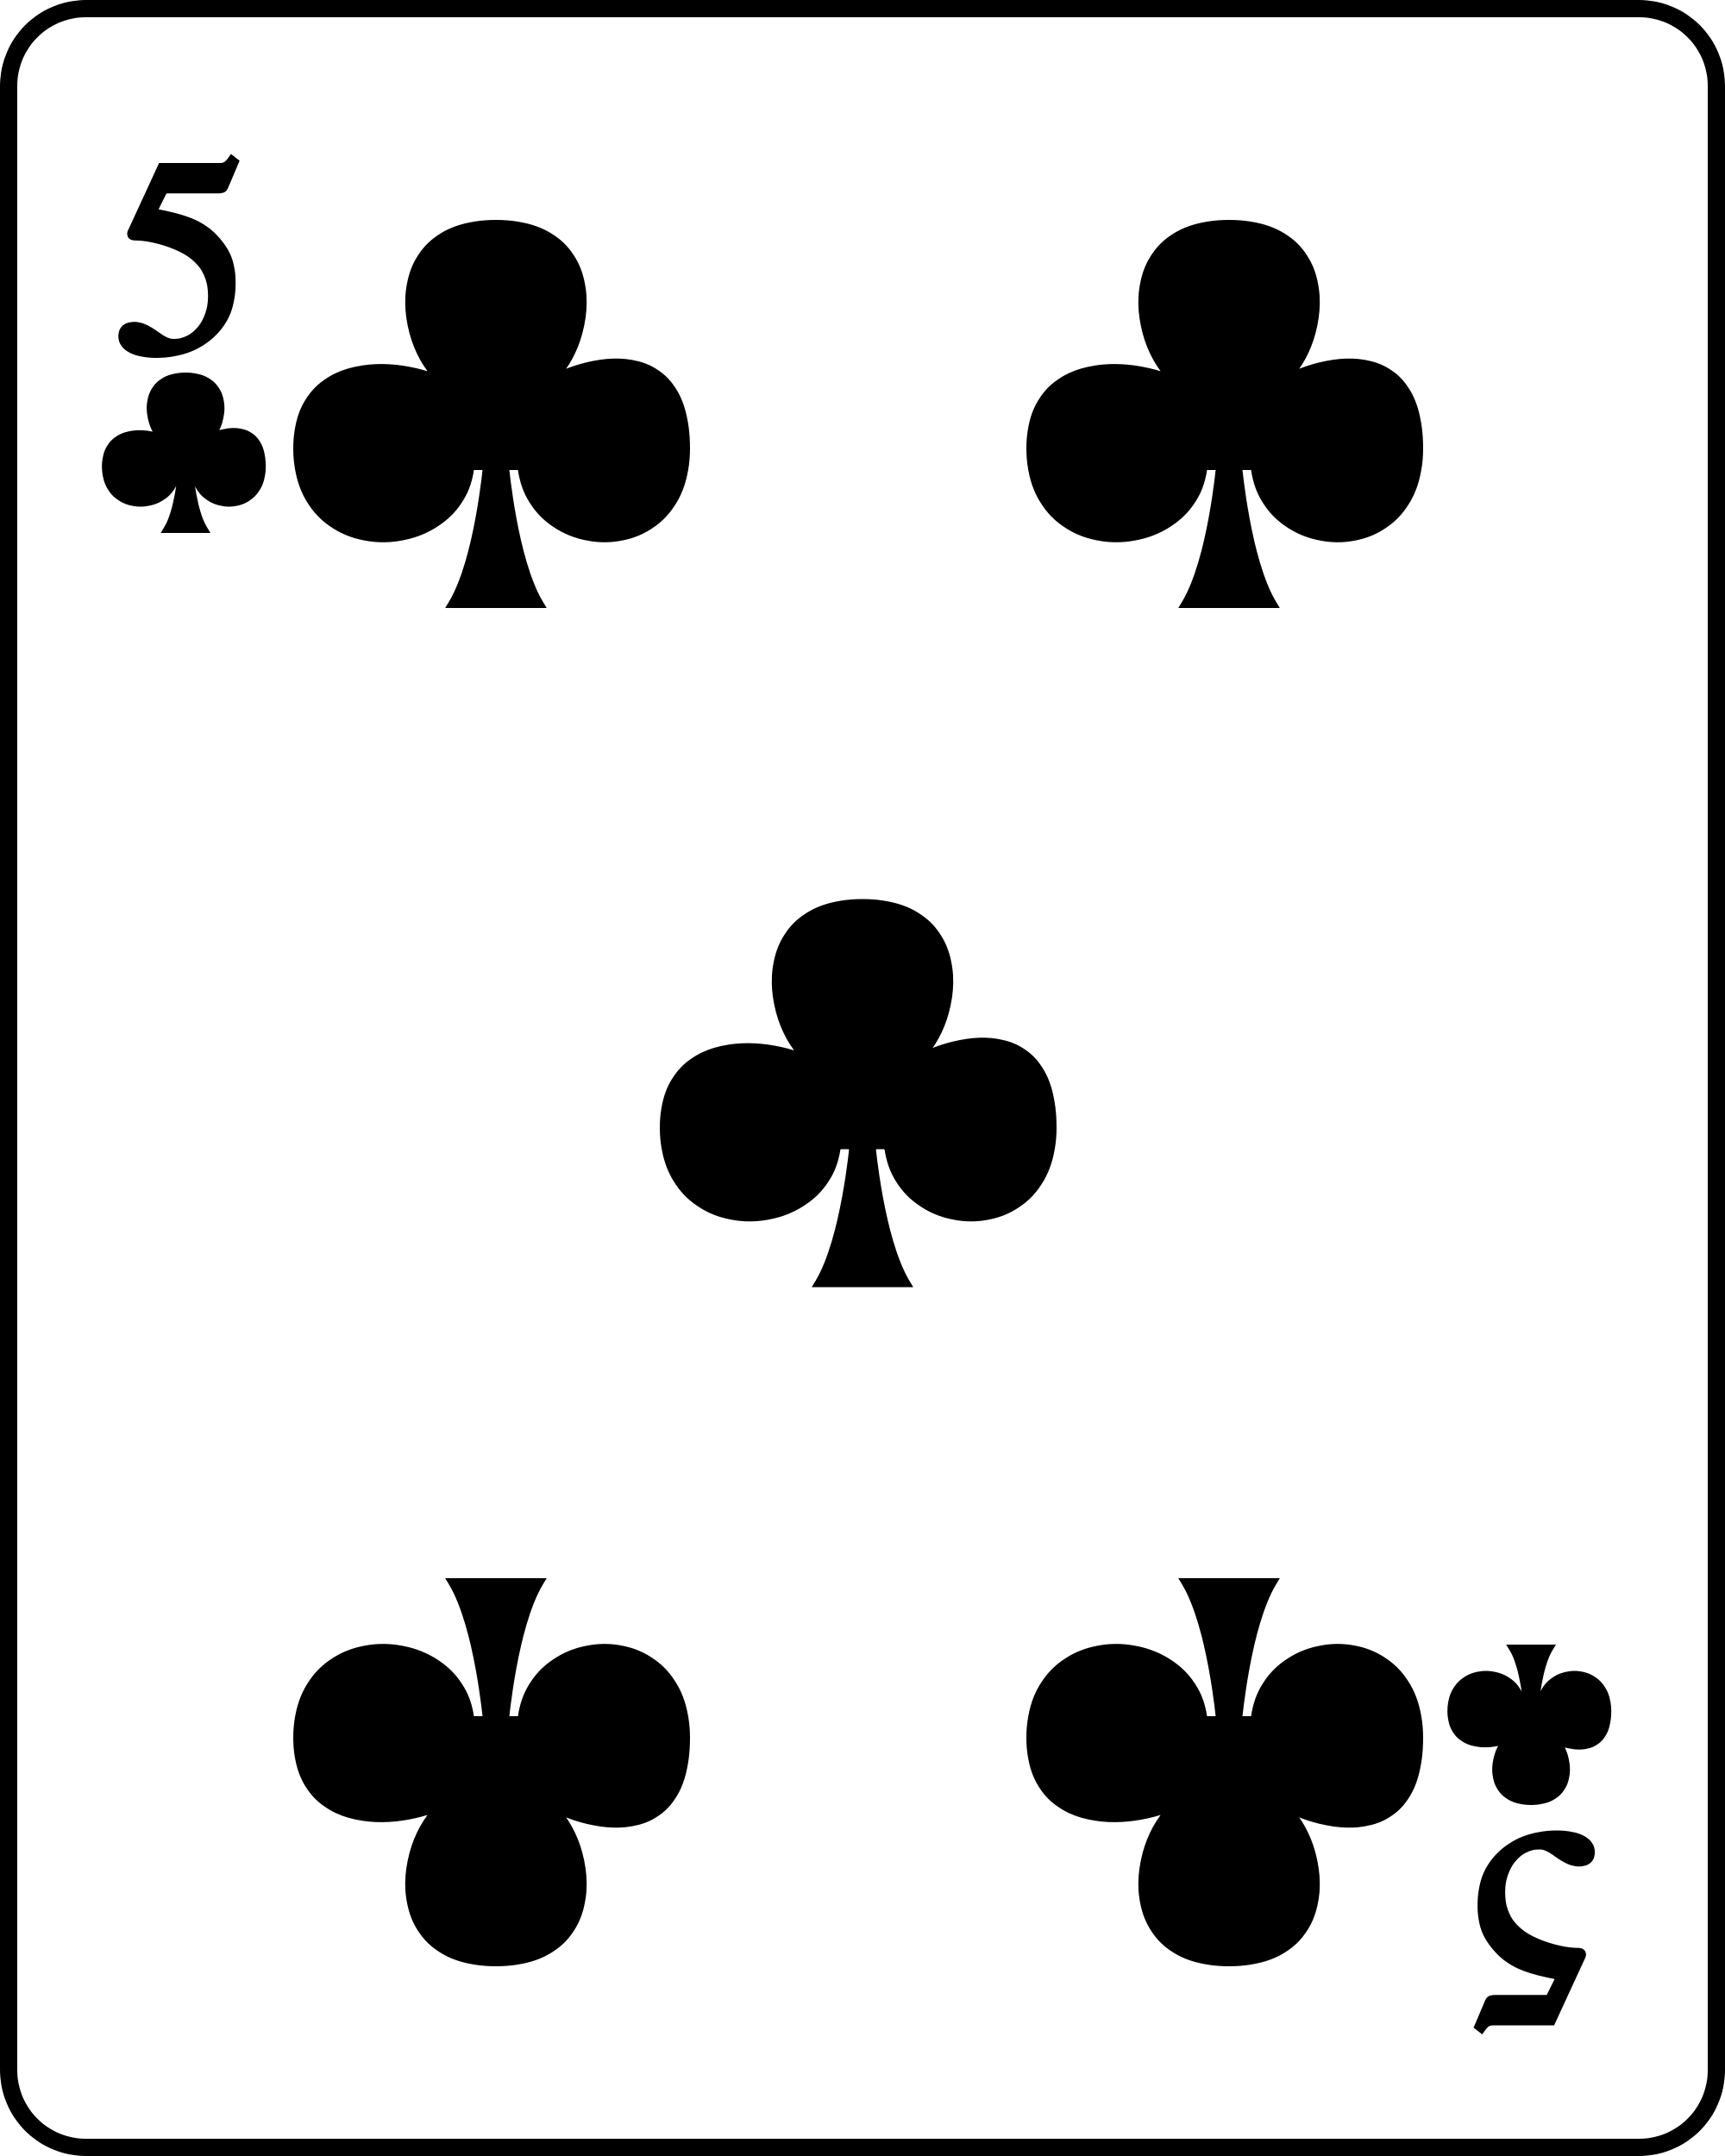 File:Playing card club 5.svg - Wikimedia Commons